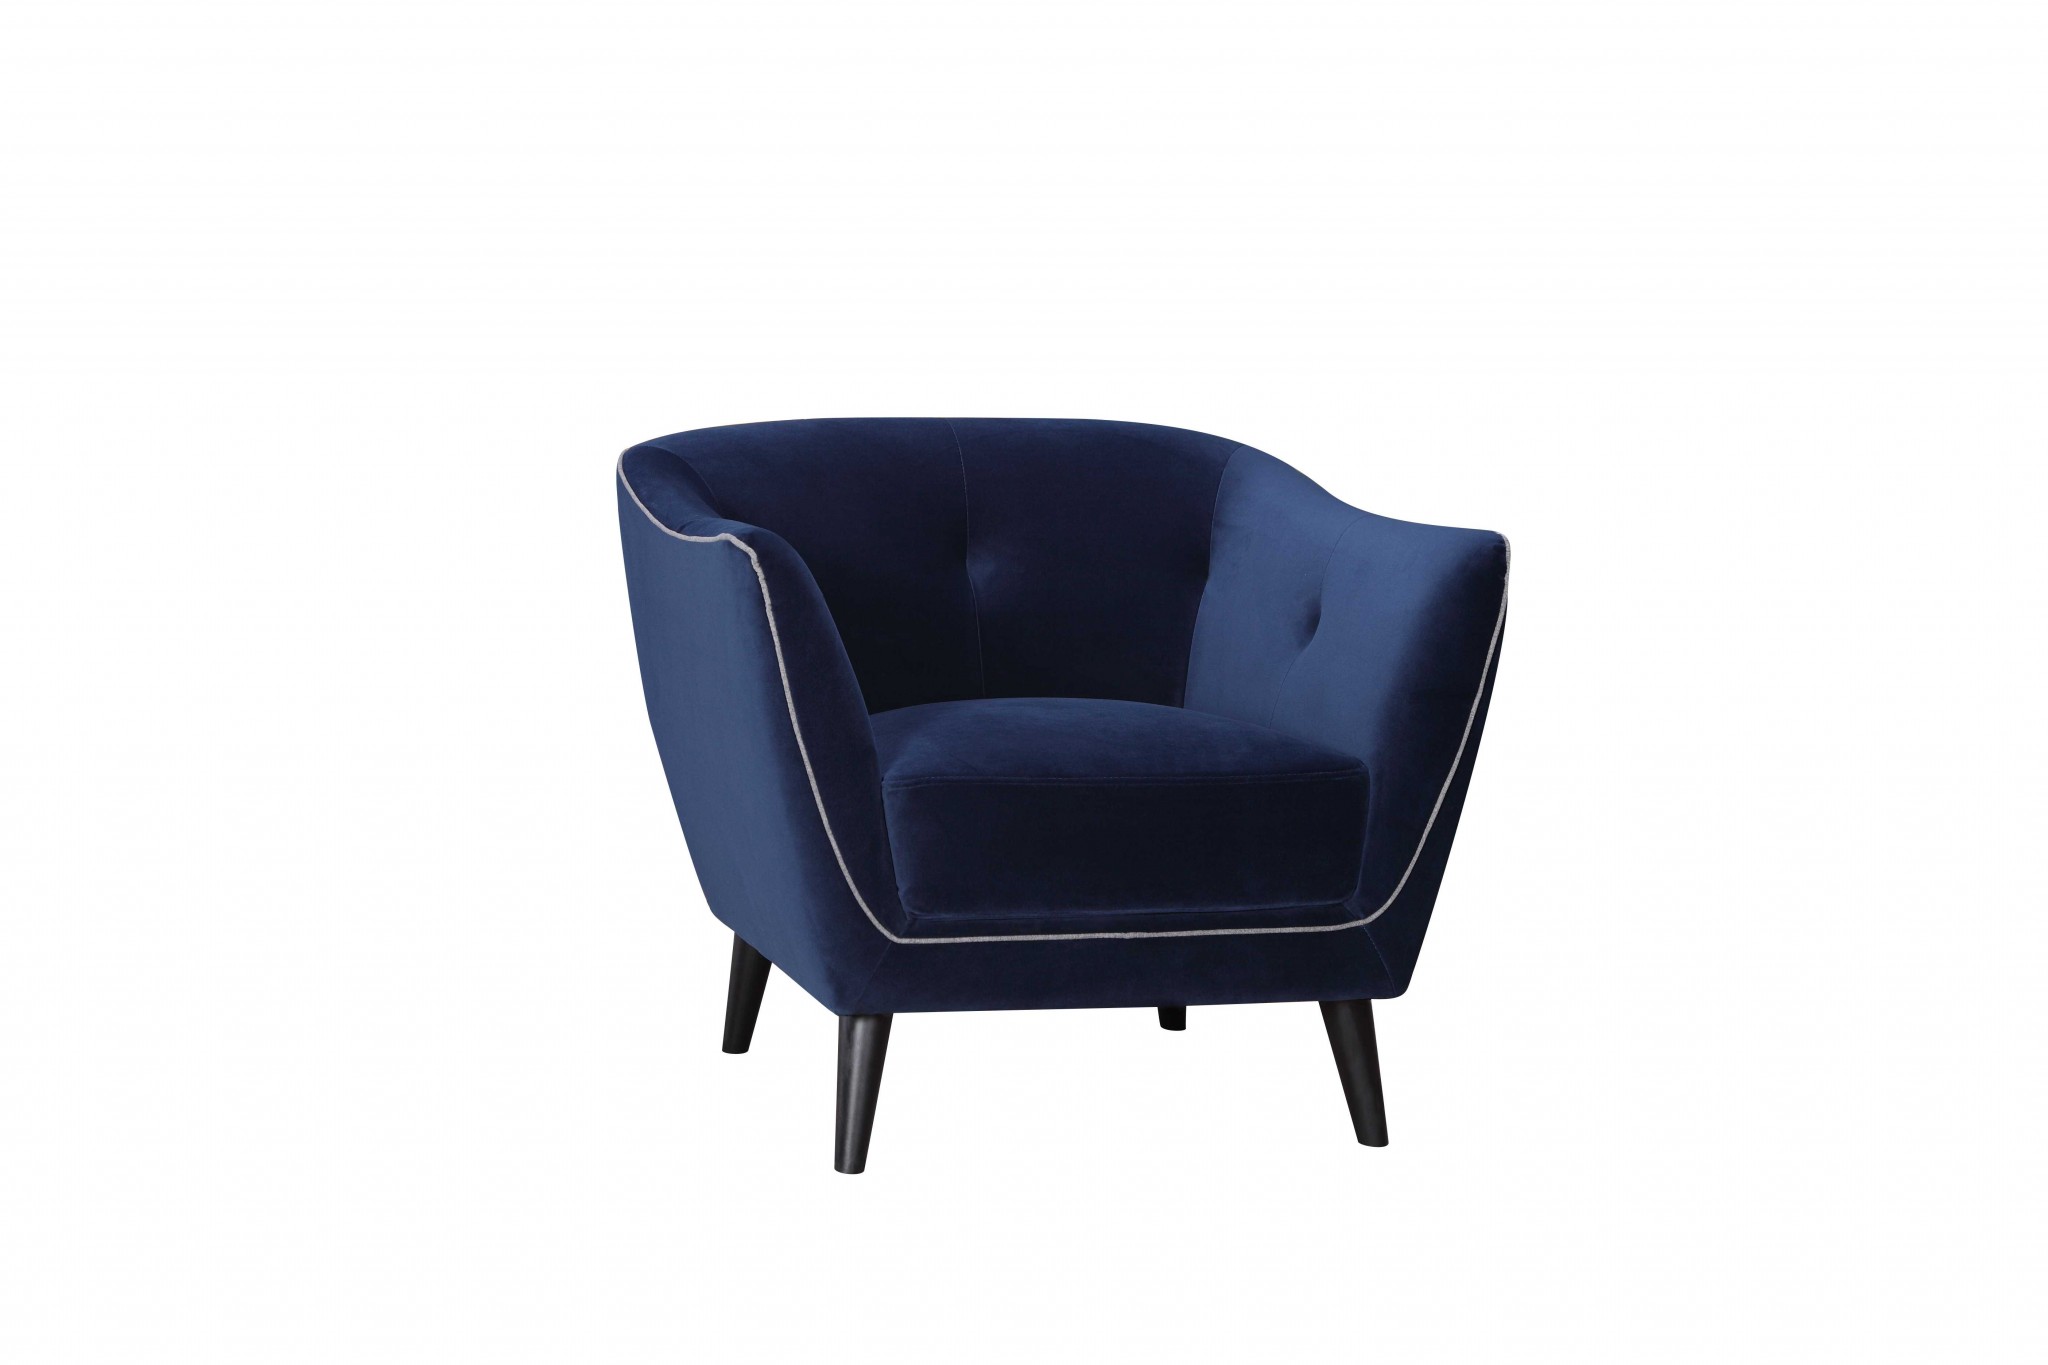 35" X 34" X 31" Blue Polyester Chair